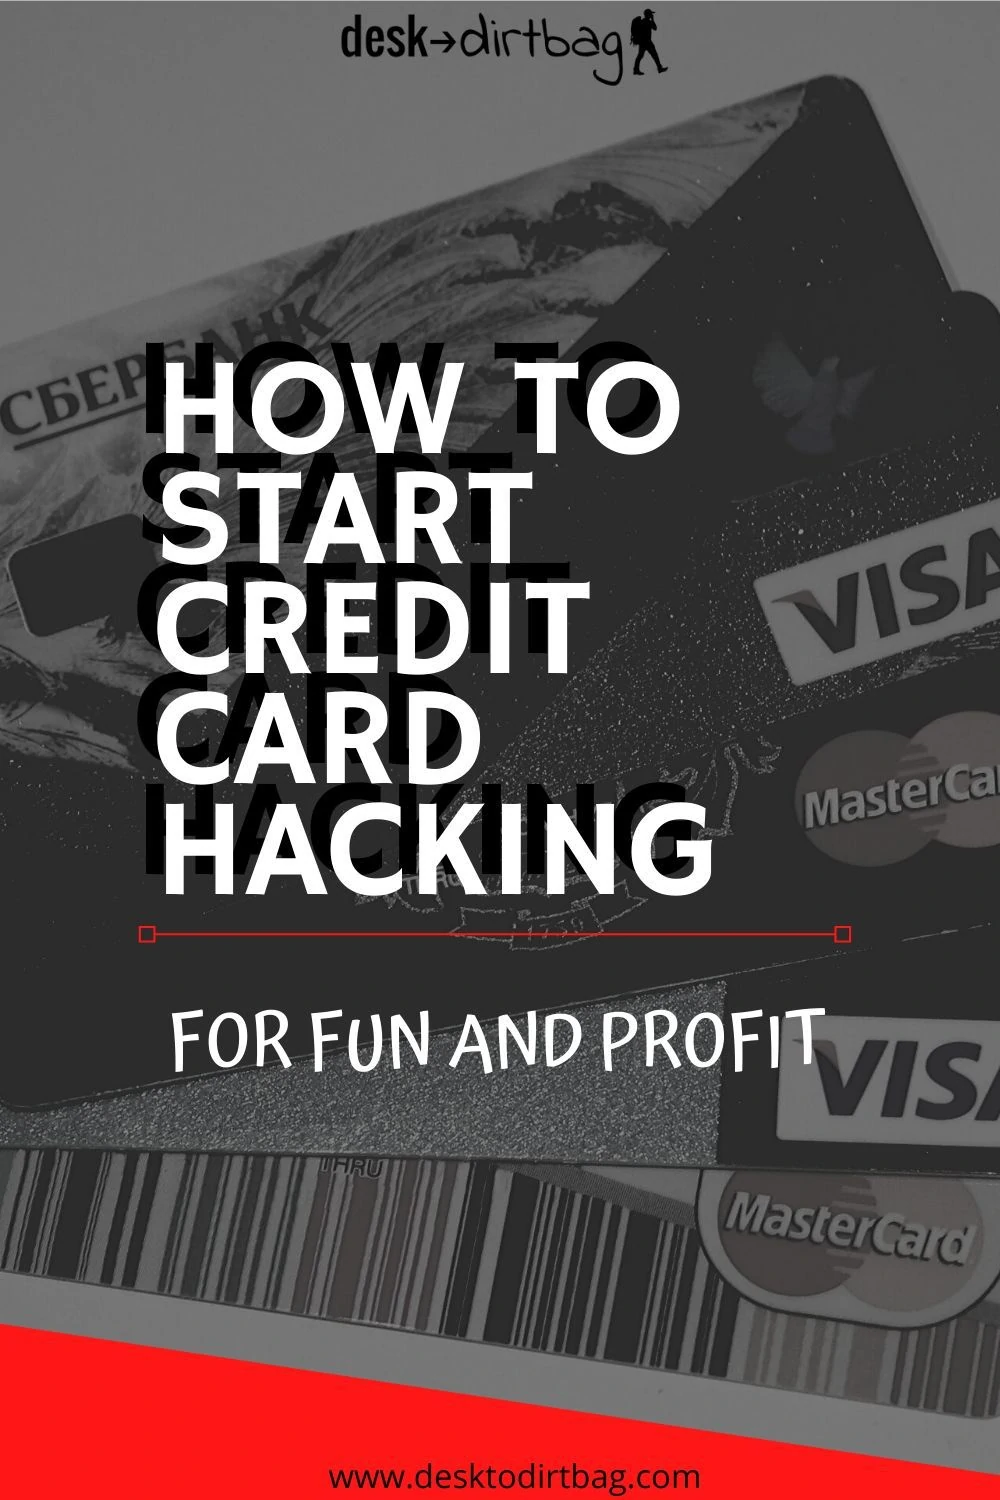 How to Get Started Travel Hacking for Fun and Profit travel-hacking, how-to